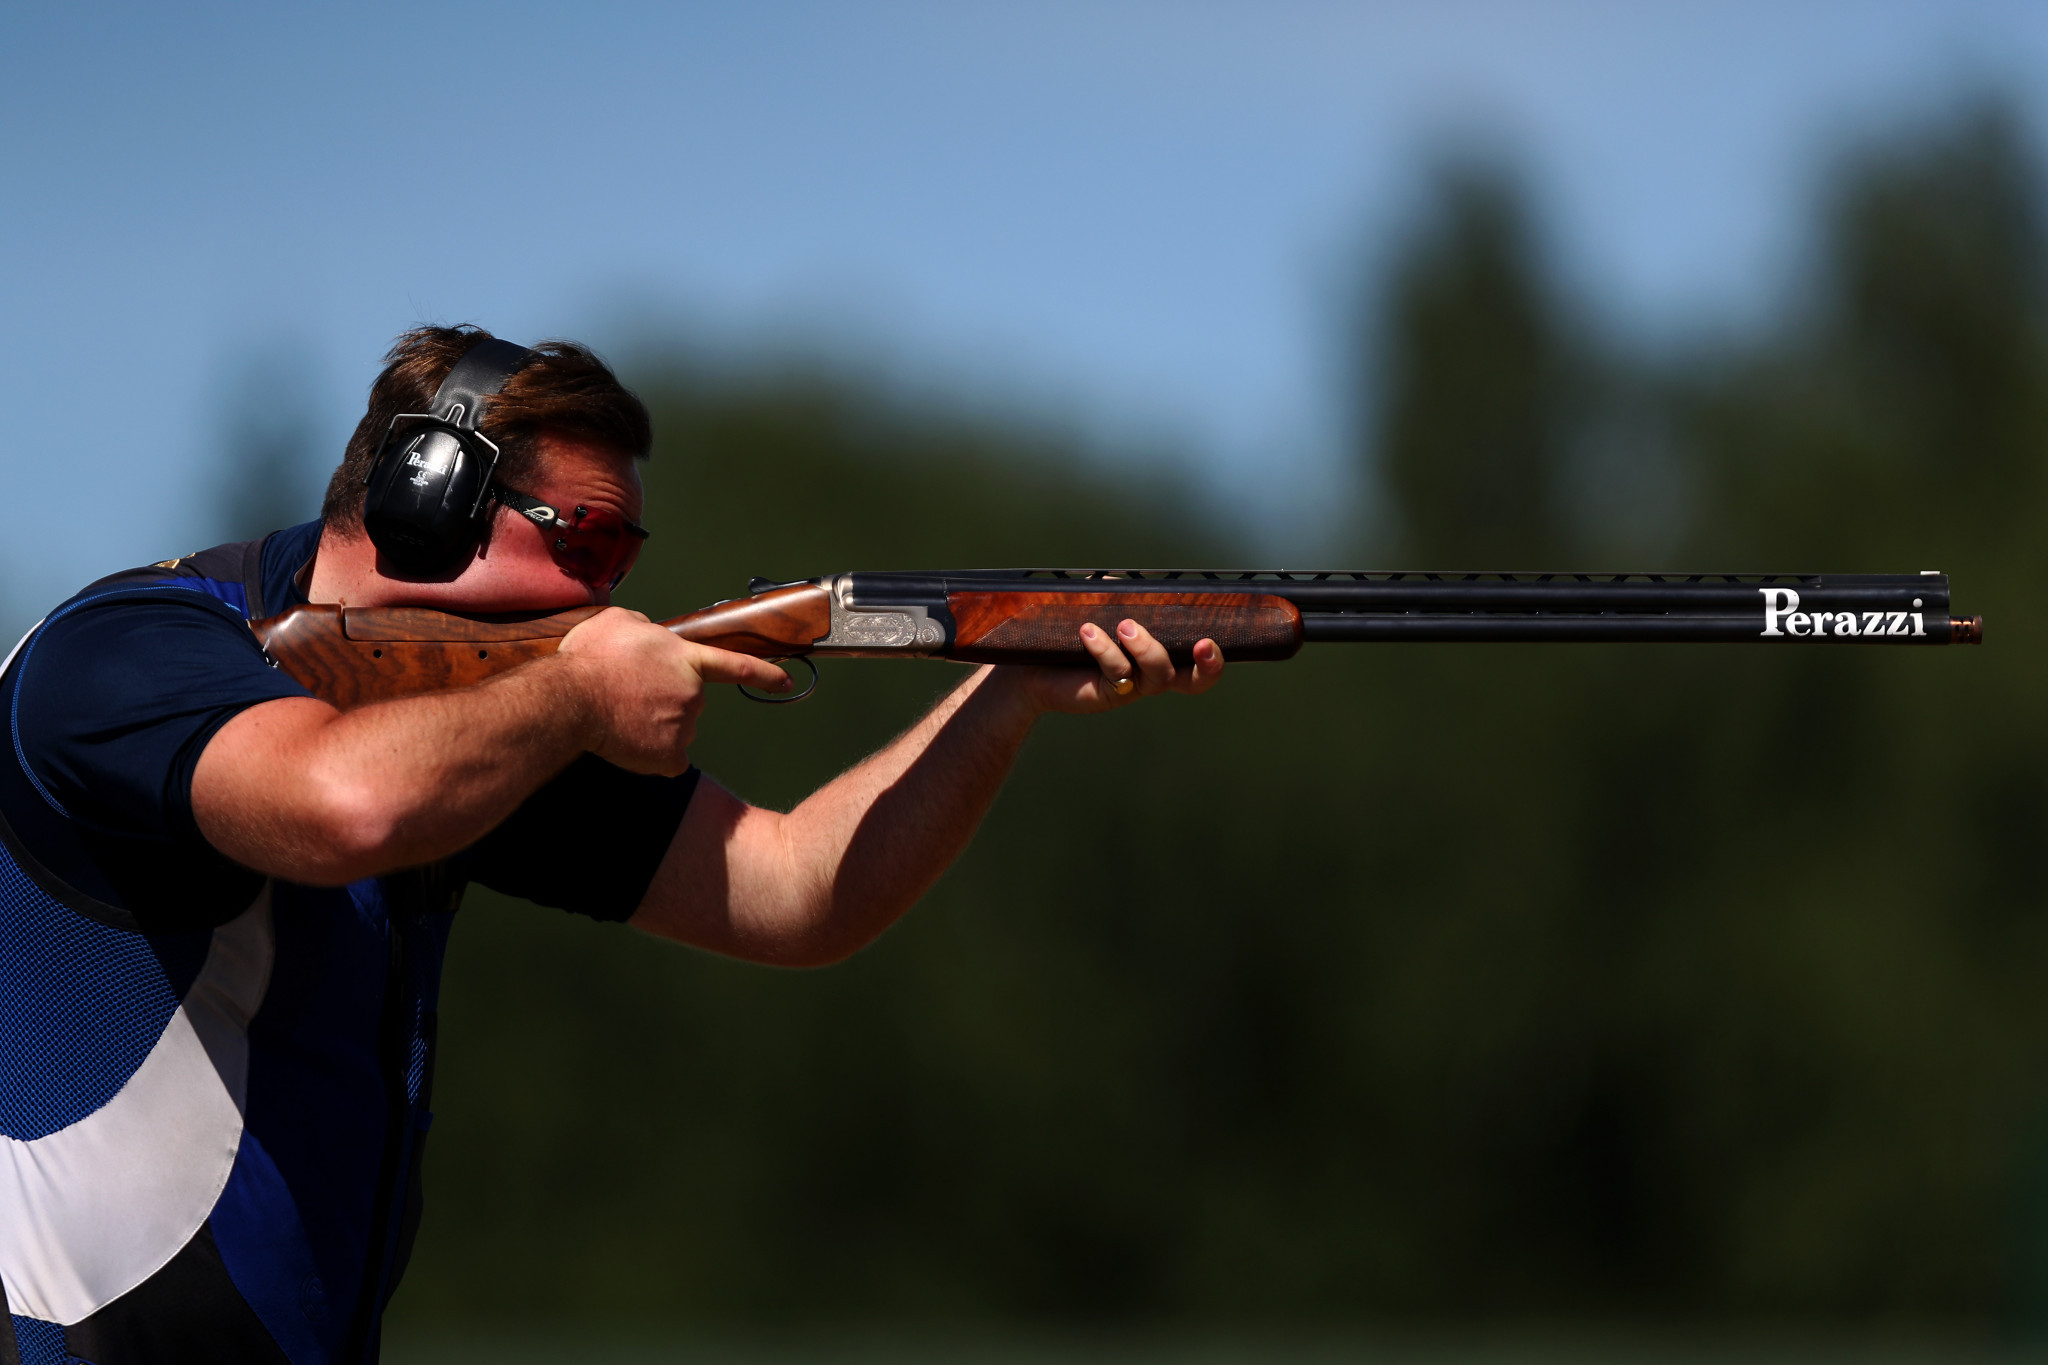 Britain's Matthew Coward-Holley won the bronze in the men's trap at Tokyo 2020 and is one of the leading shooters at the ISSF Shotgun World Cup in Nicosia ©Getty Images